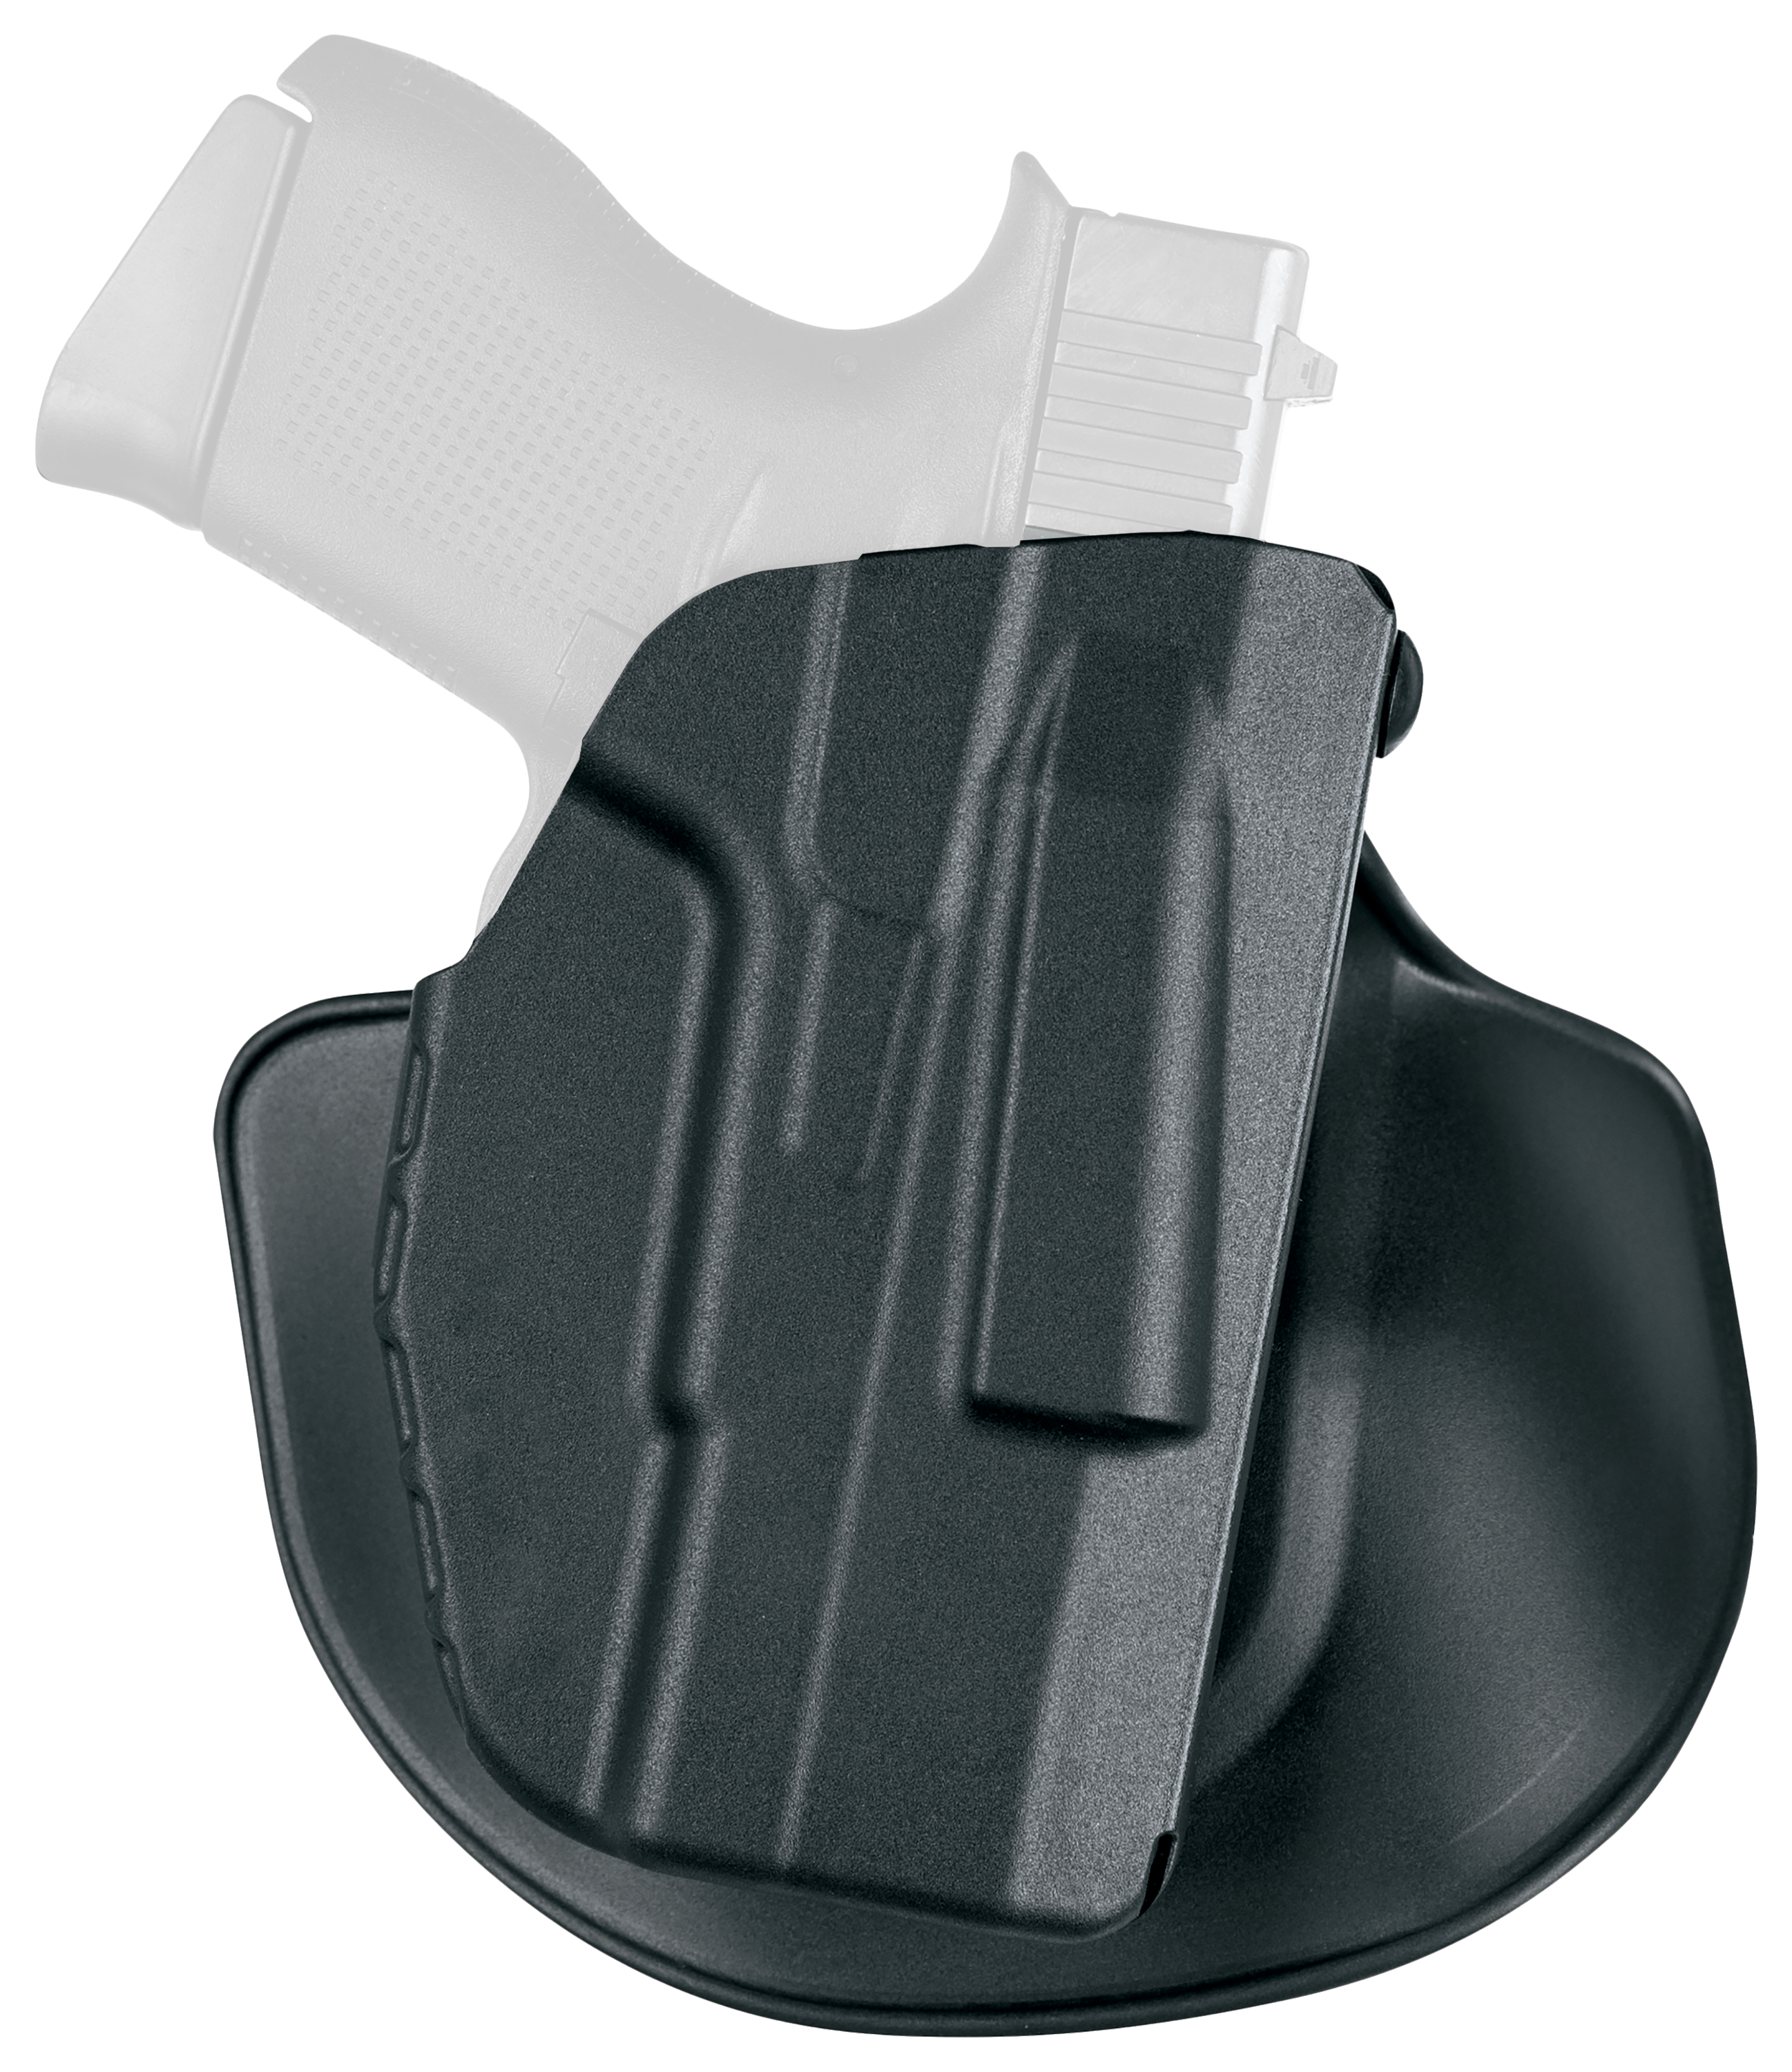 Safariland Holsters in Canada